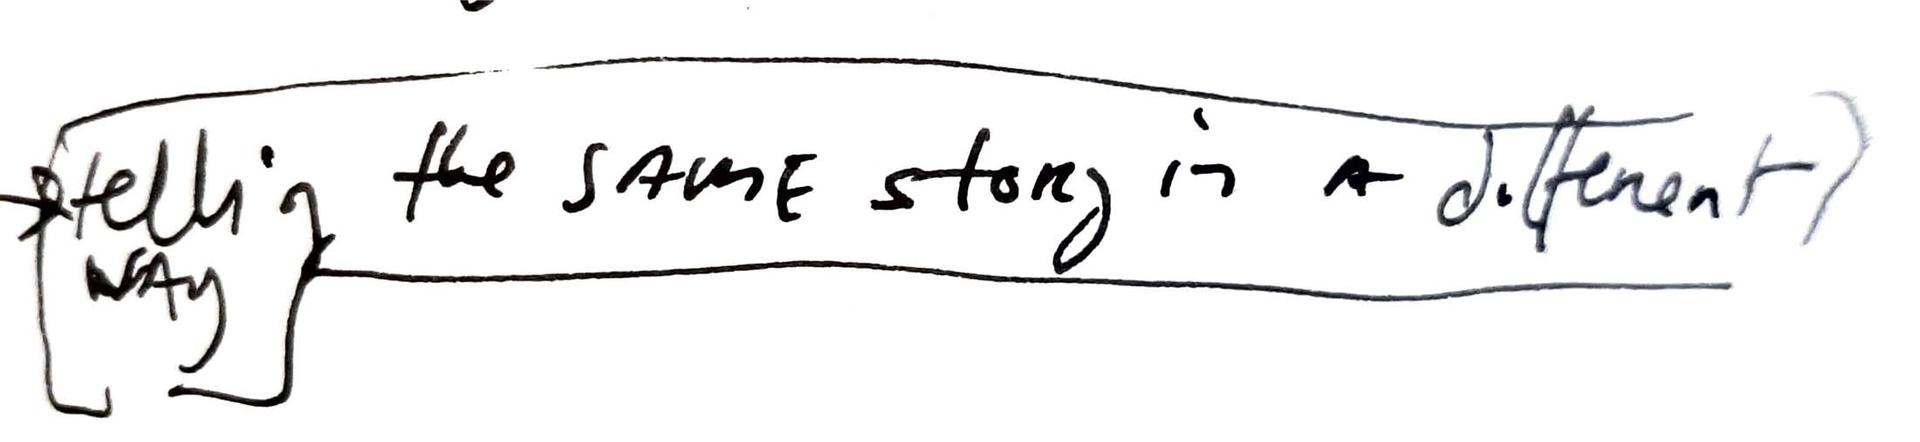 hand written note, starting with an arrow, reading telling the same story in a different way. The phrase is circled.